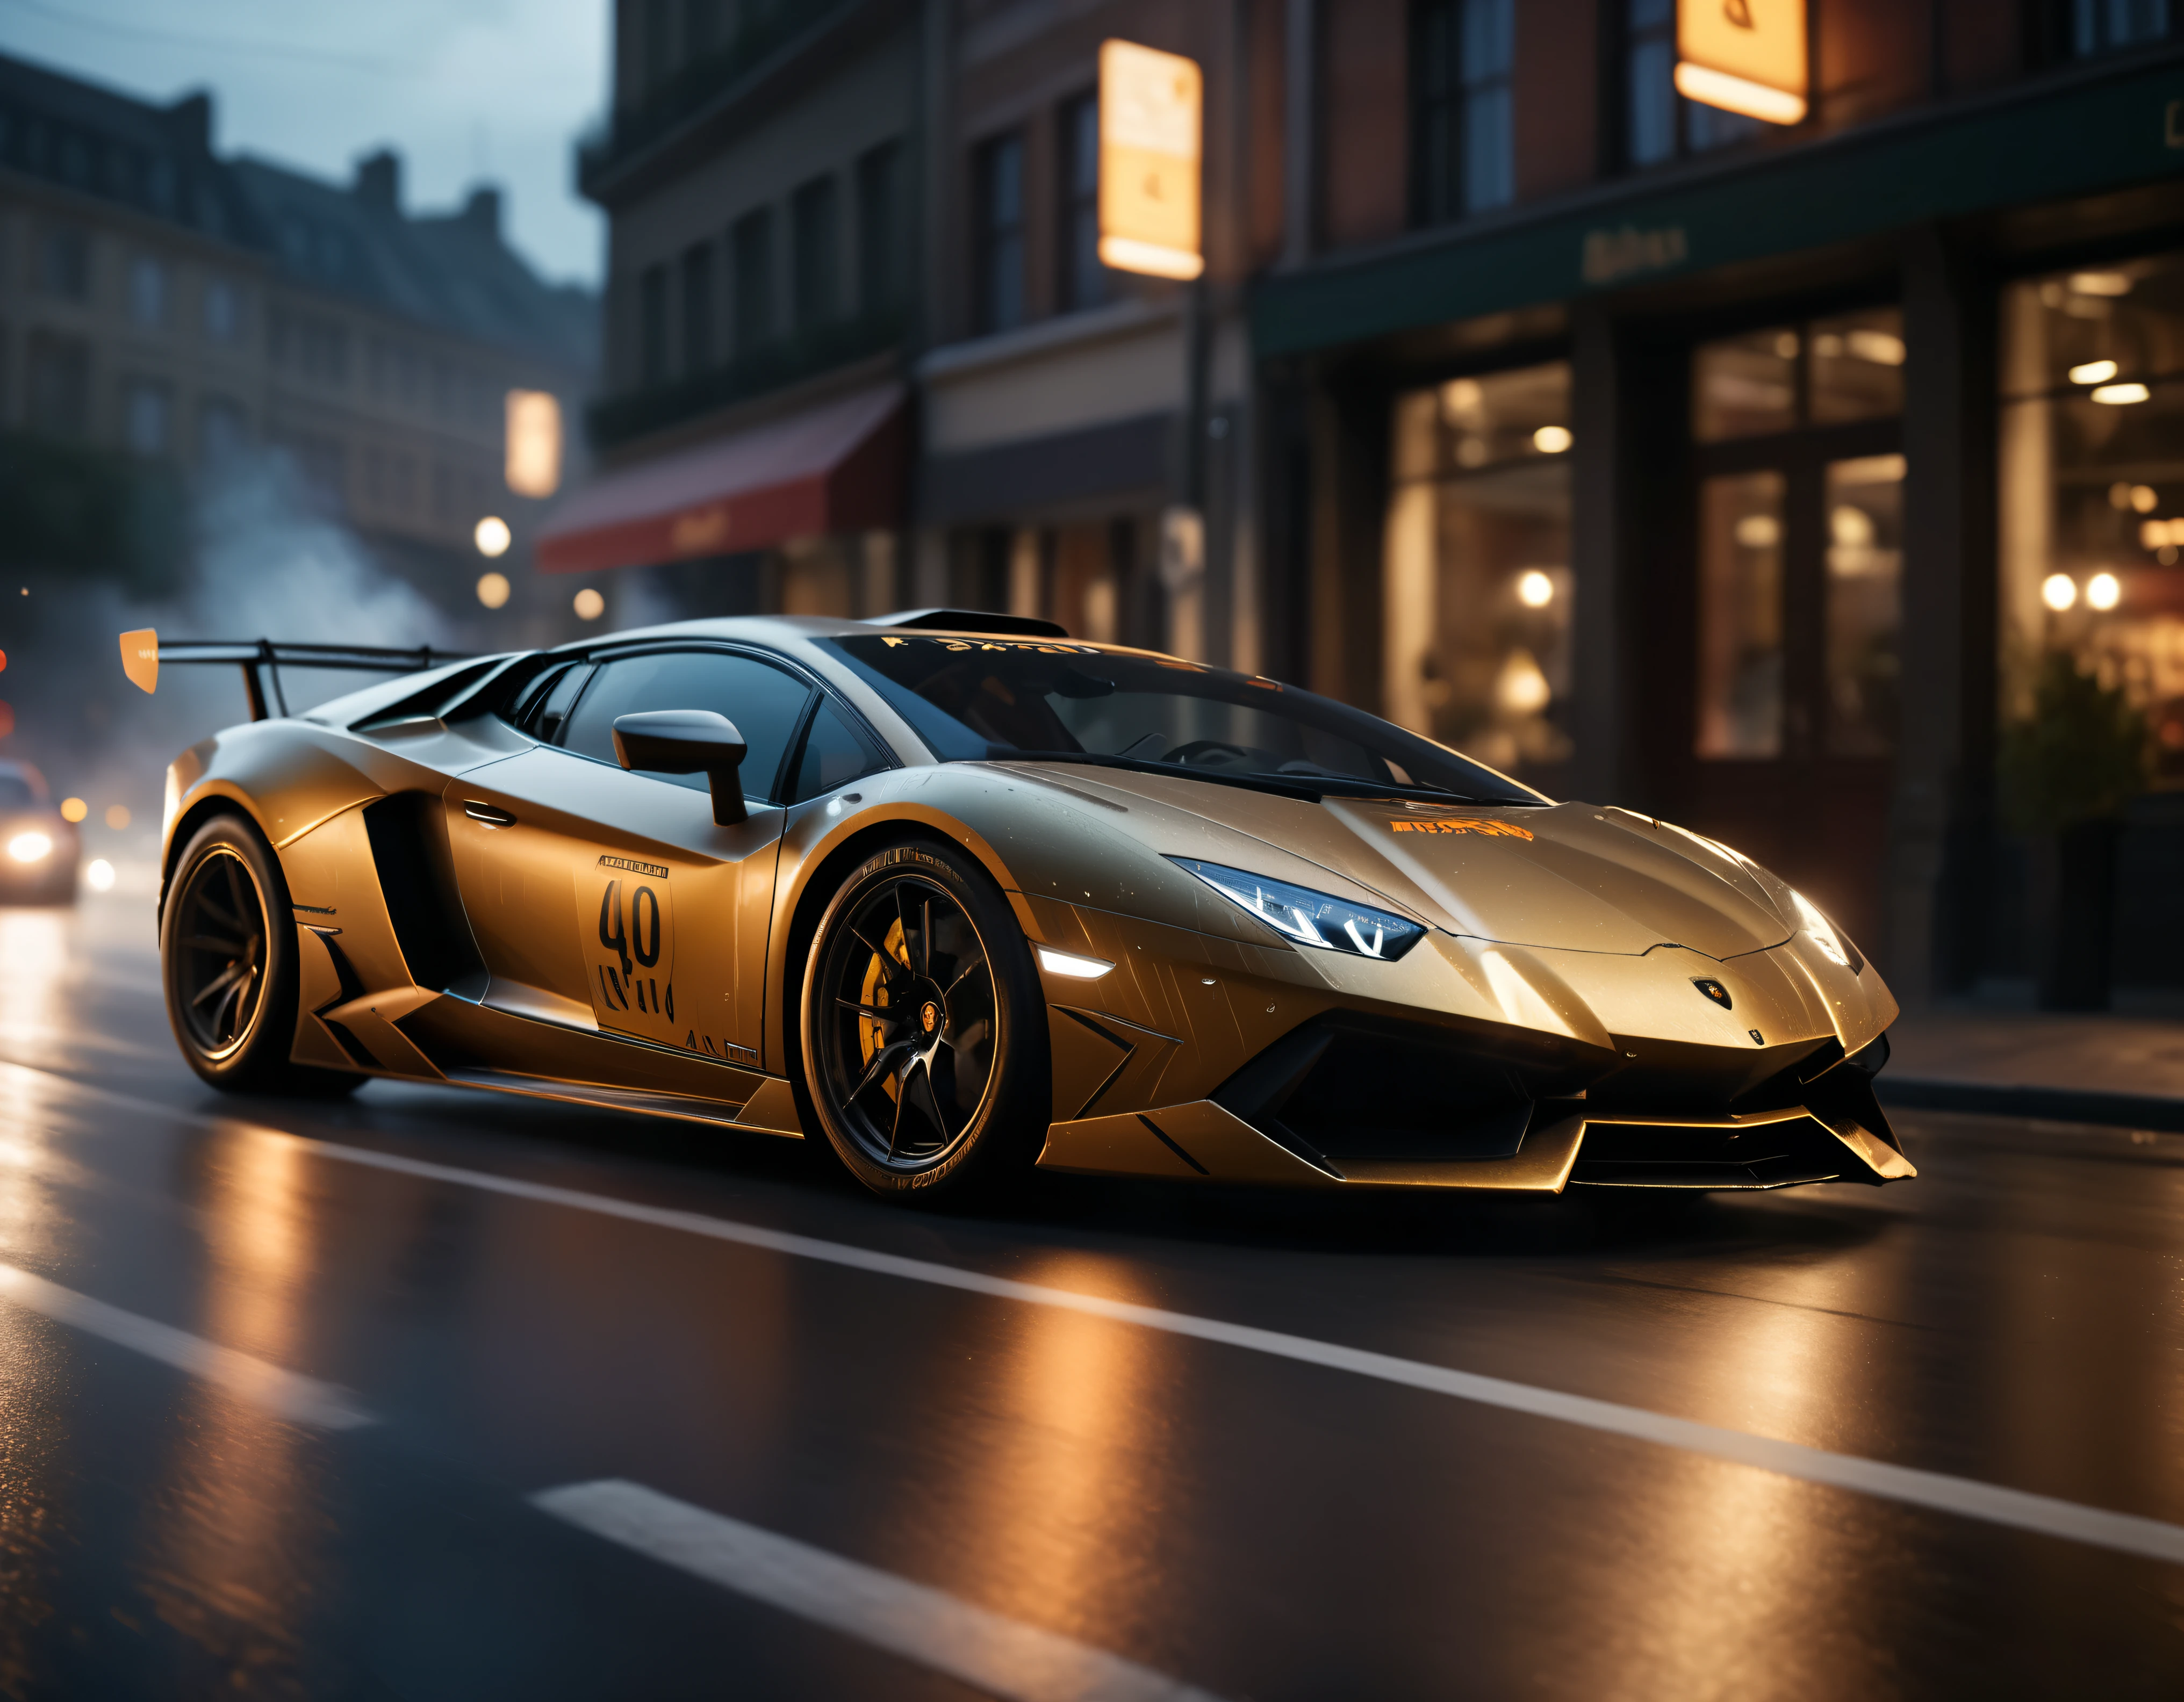 ((Masterpiece in maximum 16K resolution):1.6),((soft_color_photograpy:)1.5), ((Ultra-Detailed):1.4),((Movie-like still images and dynamic angles):1.3), ((motion blur):1.1) | (Cinematic photo of a speeding Lamborghini race car), (street race), (cinematic lens), ((tyndall effect):1.1), (Street light), (smoke), (super car), (Night at City Street), (sense of speed), (shimmer), (visual experience), (Realism), (Realistic), award-winning graphics, dark shot, film grain, extremely detailed, Digital Art, rtx, Unreal Engine, scene concept anti glare effect, All captured with sharp focus.

Rendered in ultra-high definition with UHD and retina quality, this masterpiece ensures anatomical correctness and textured skin with super detail. With a focus on high quality and accuracy, this award-winning portrayal captures every nuance in stunning 16k resolution, immersing viewers in its lifelike depiction. Avoid extreme angles or exaggerated expressions to maintain realism.